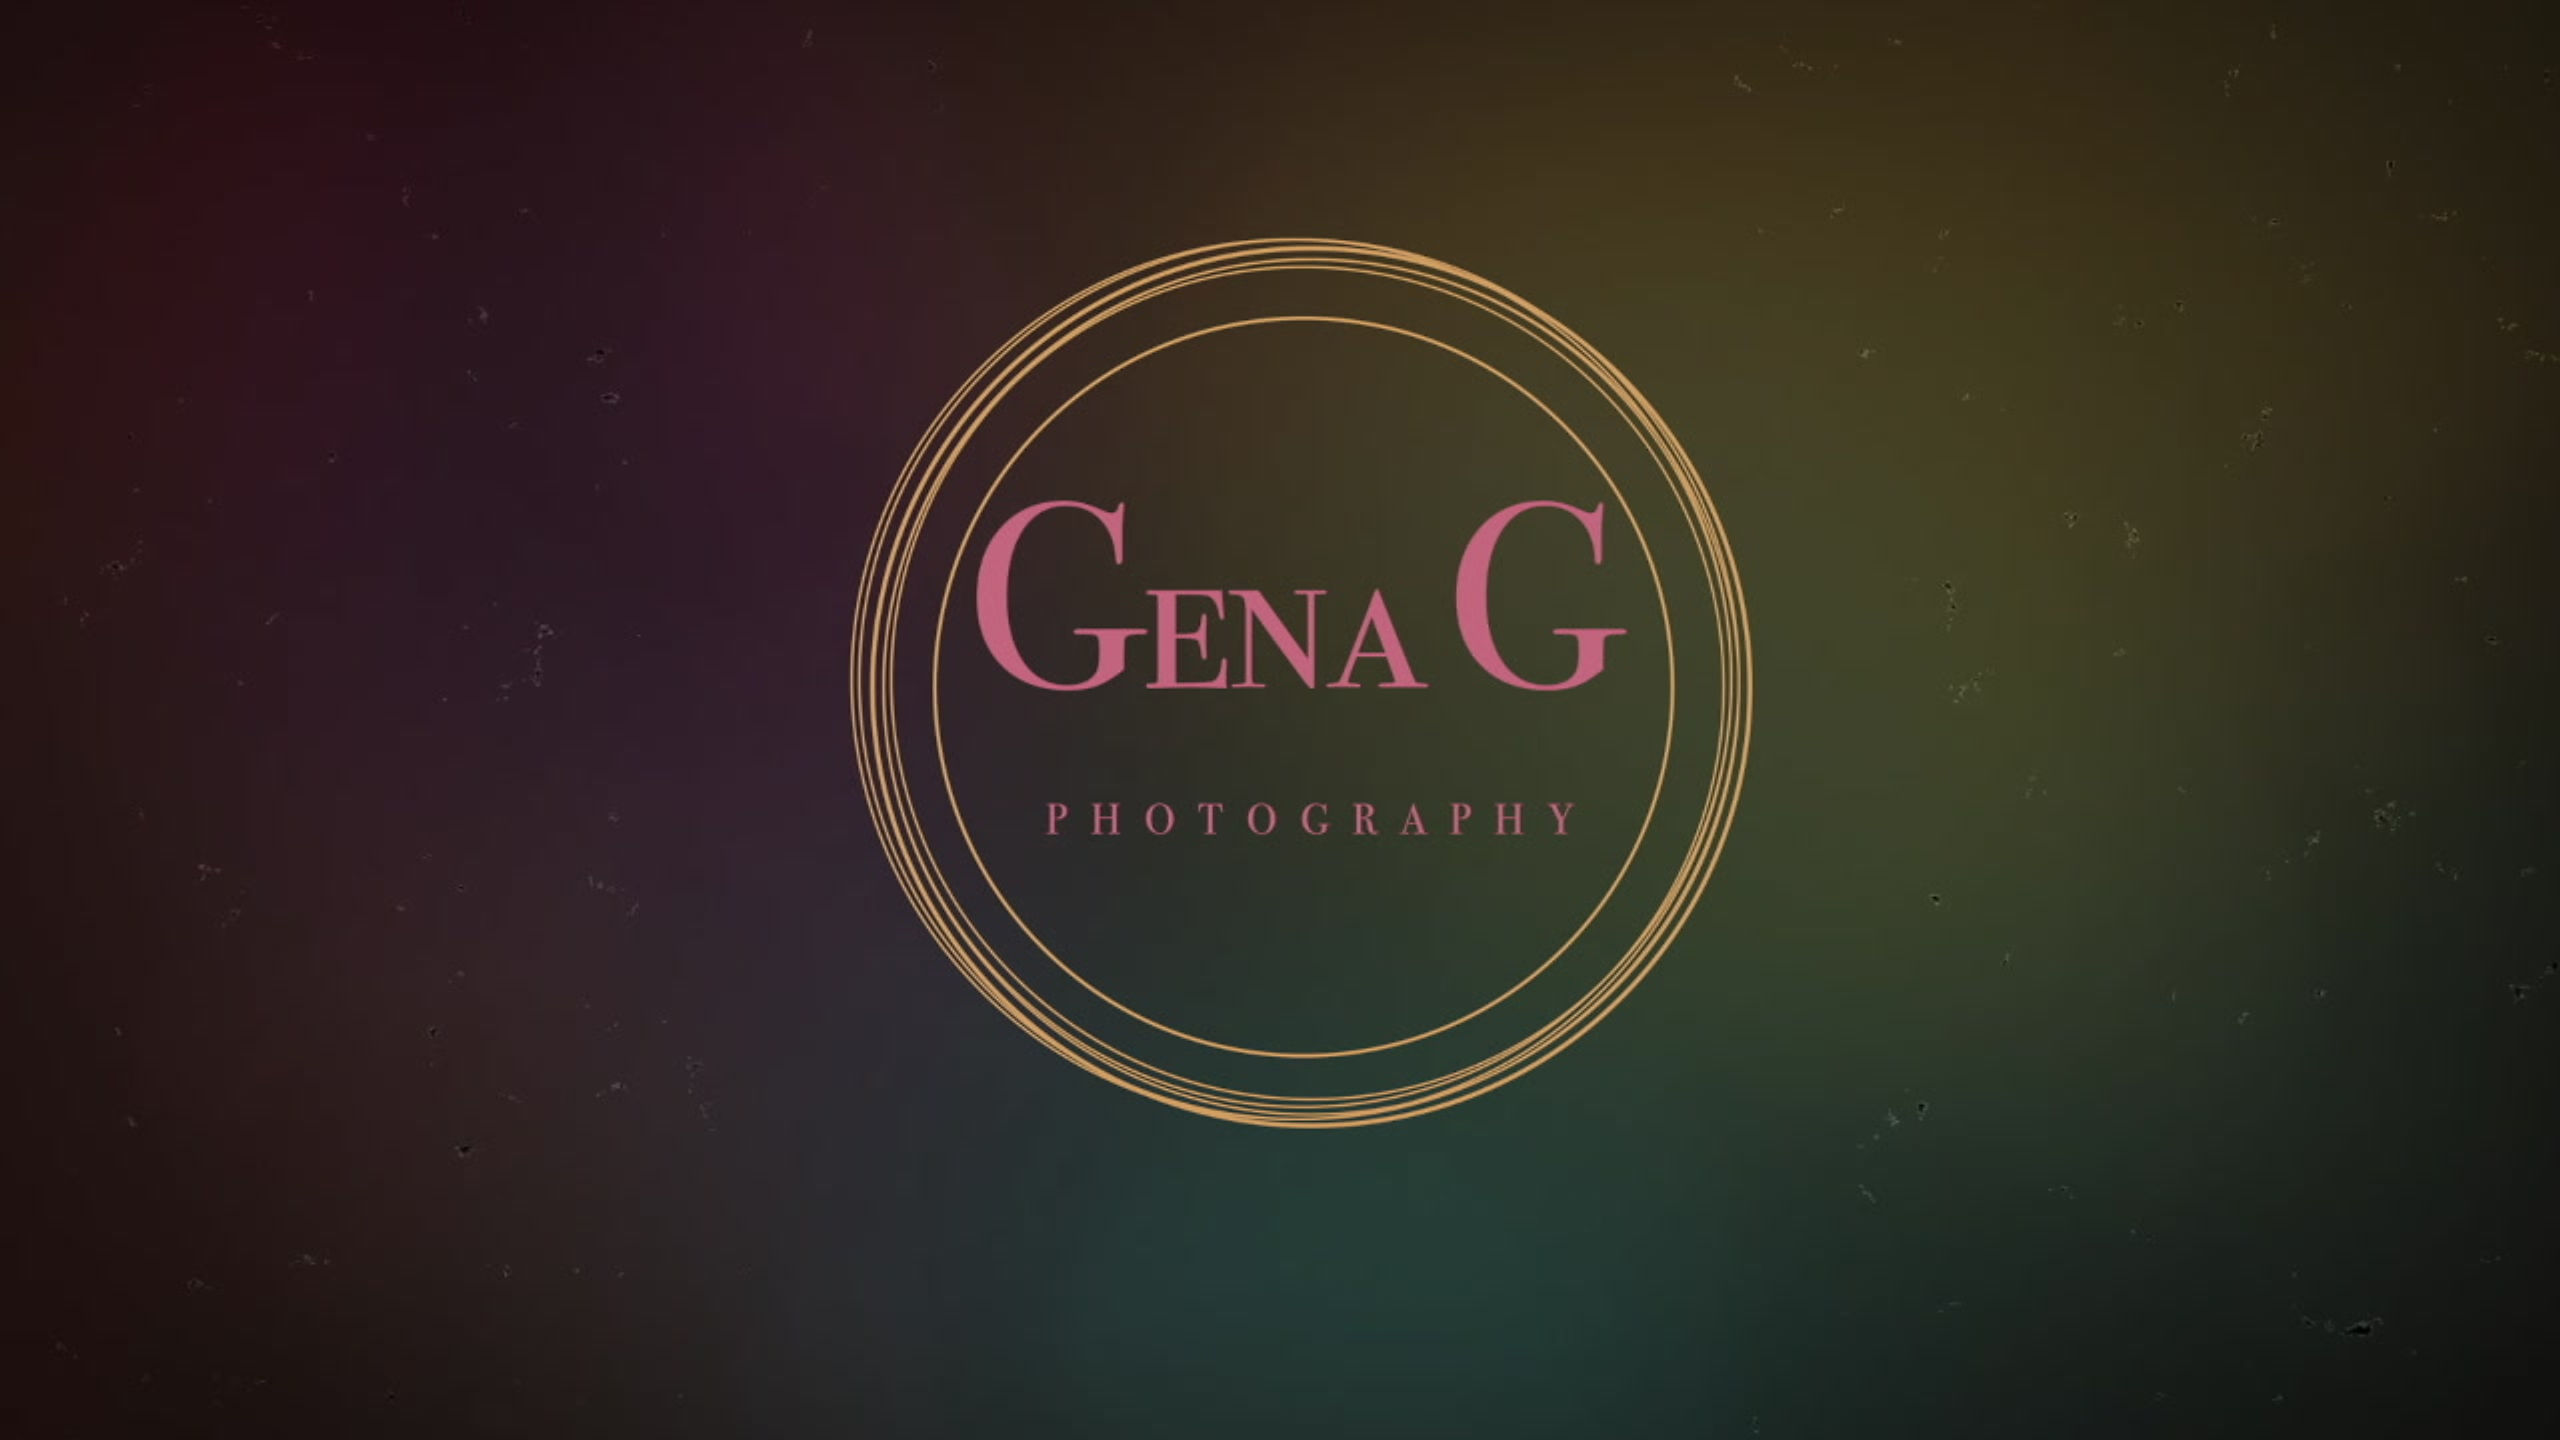 Gena G Photography Cinemagraphs